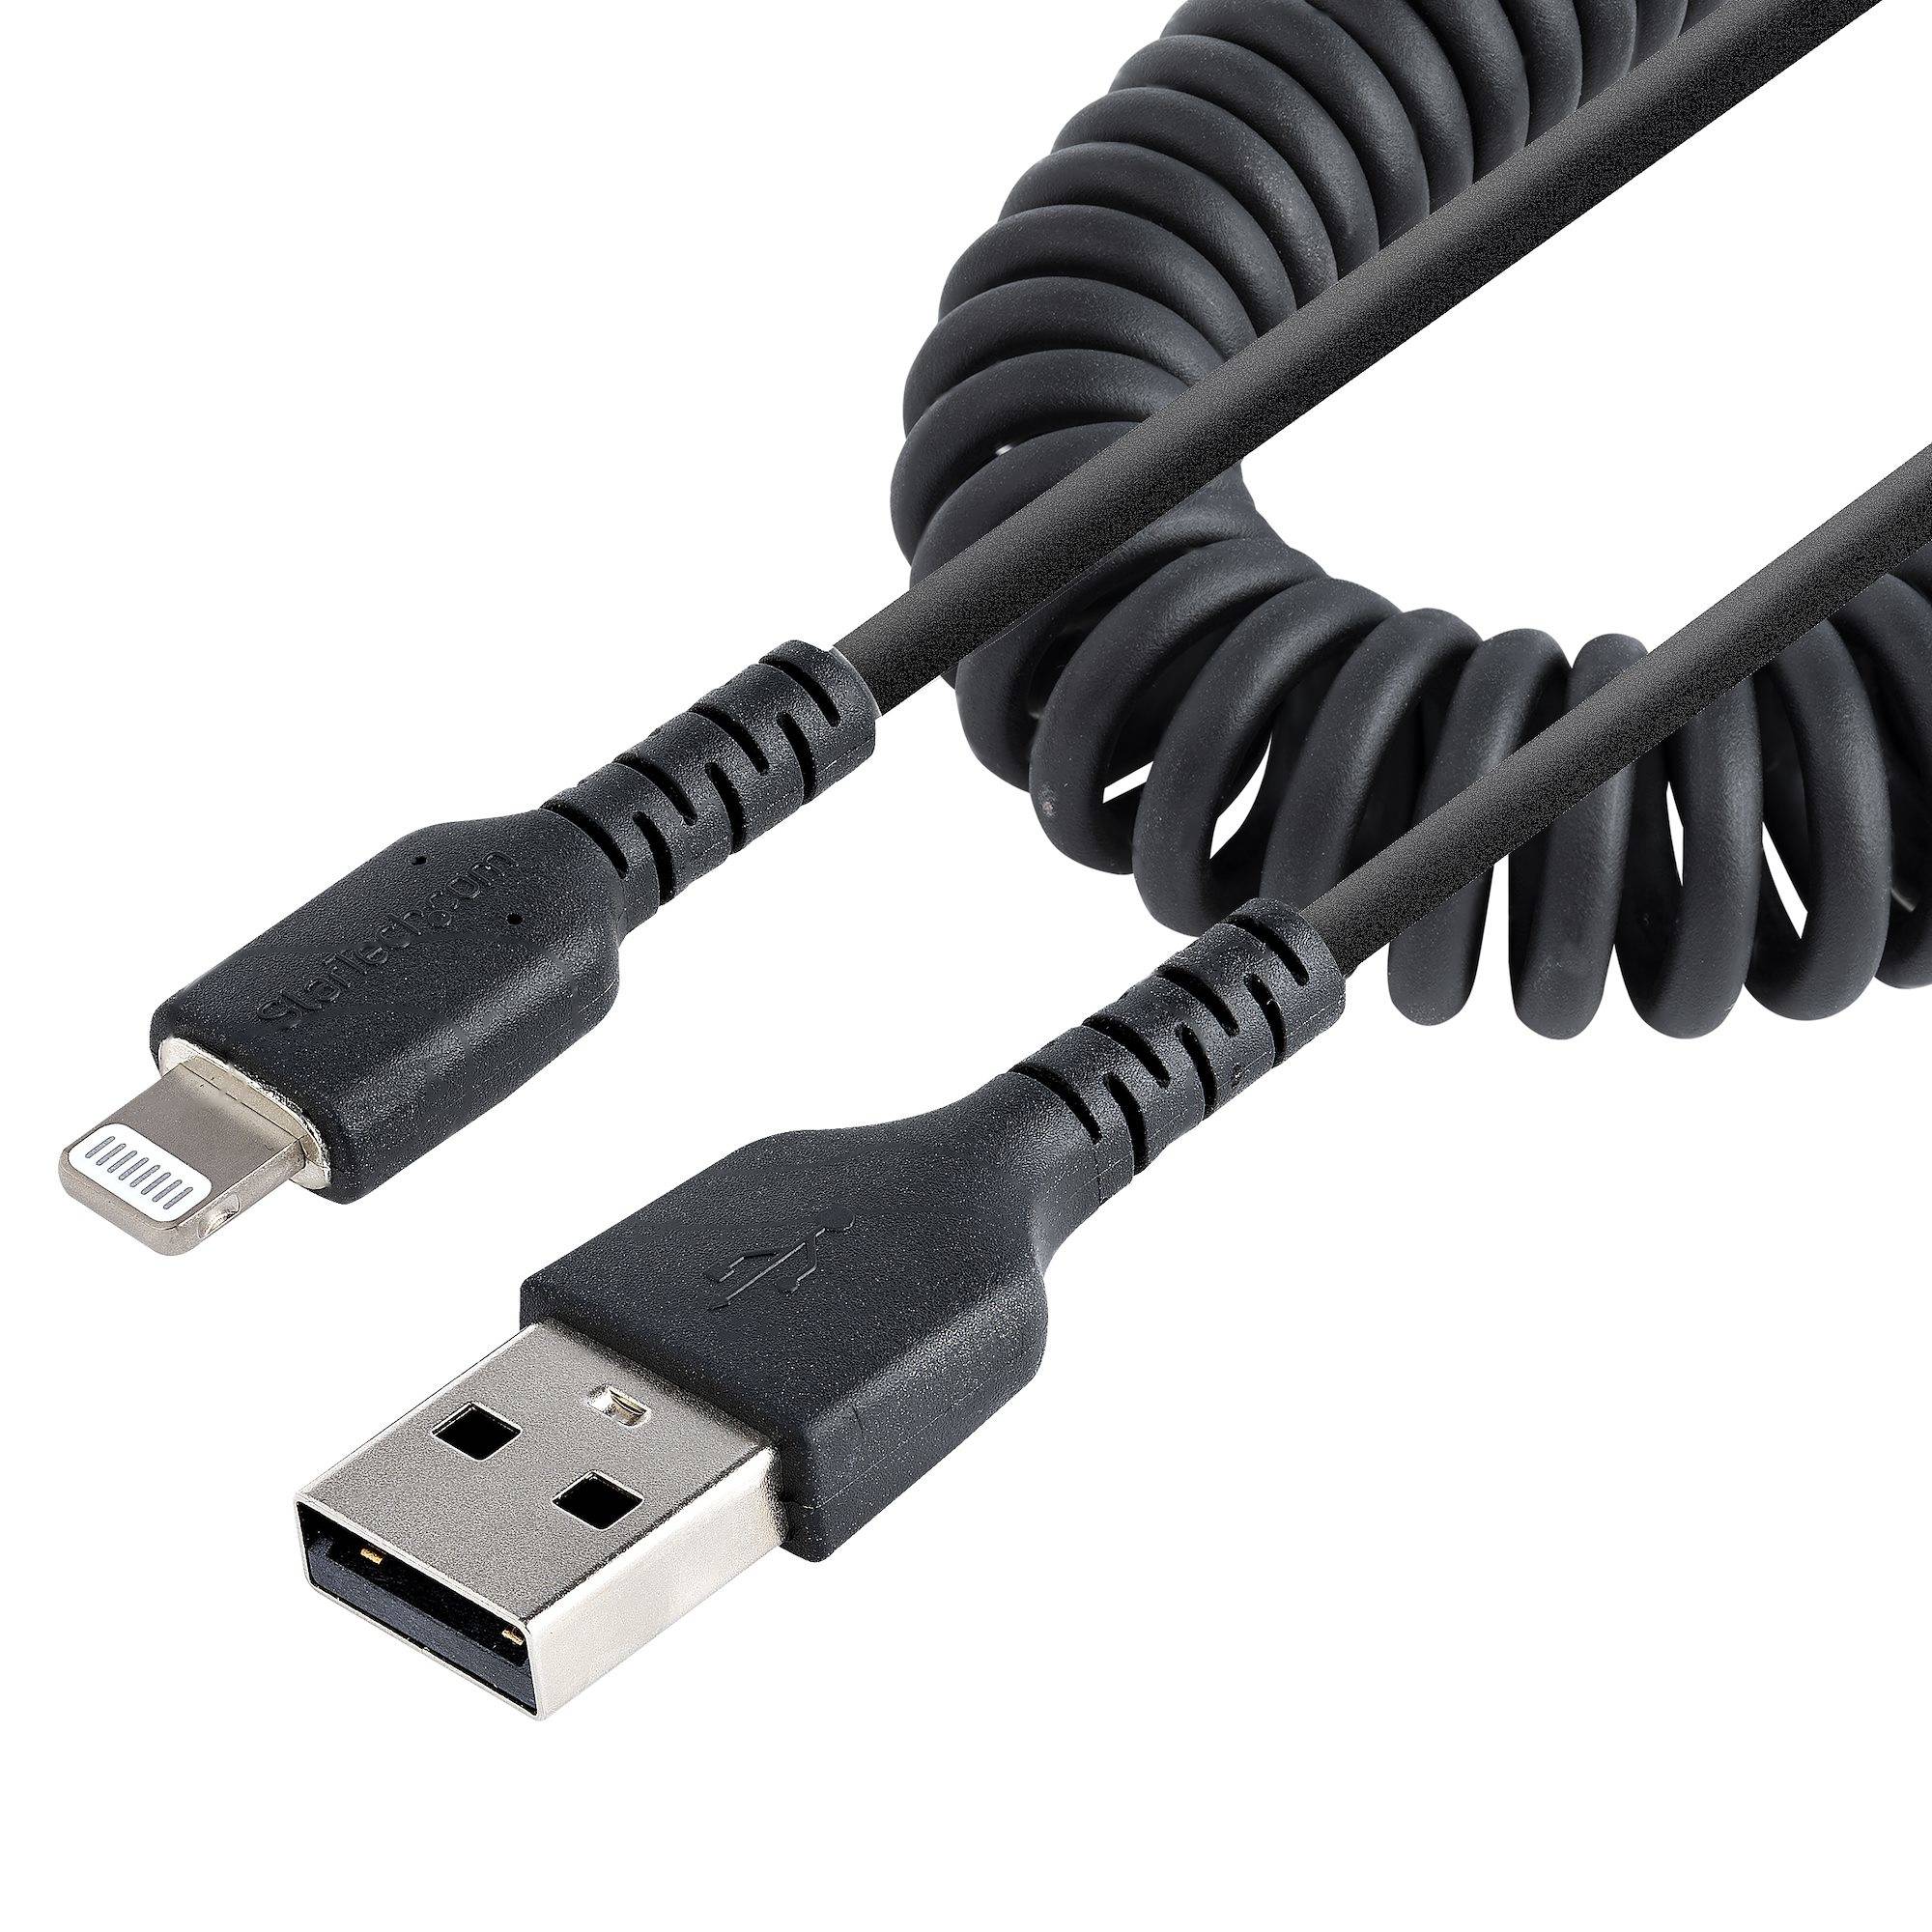 Rca Informatique - Image du produit : USB TO LIGHTNING CABLE - 50CM (20IN) COILED CABLE BLACK